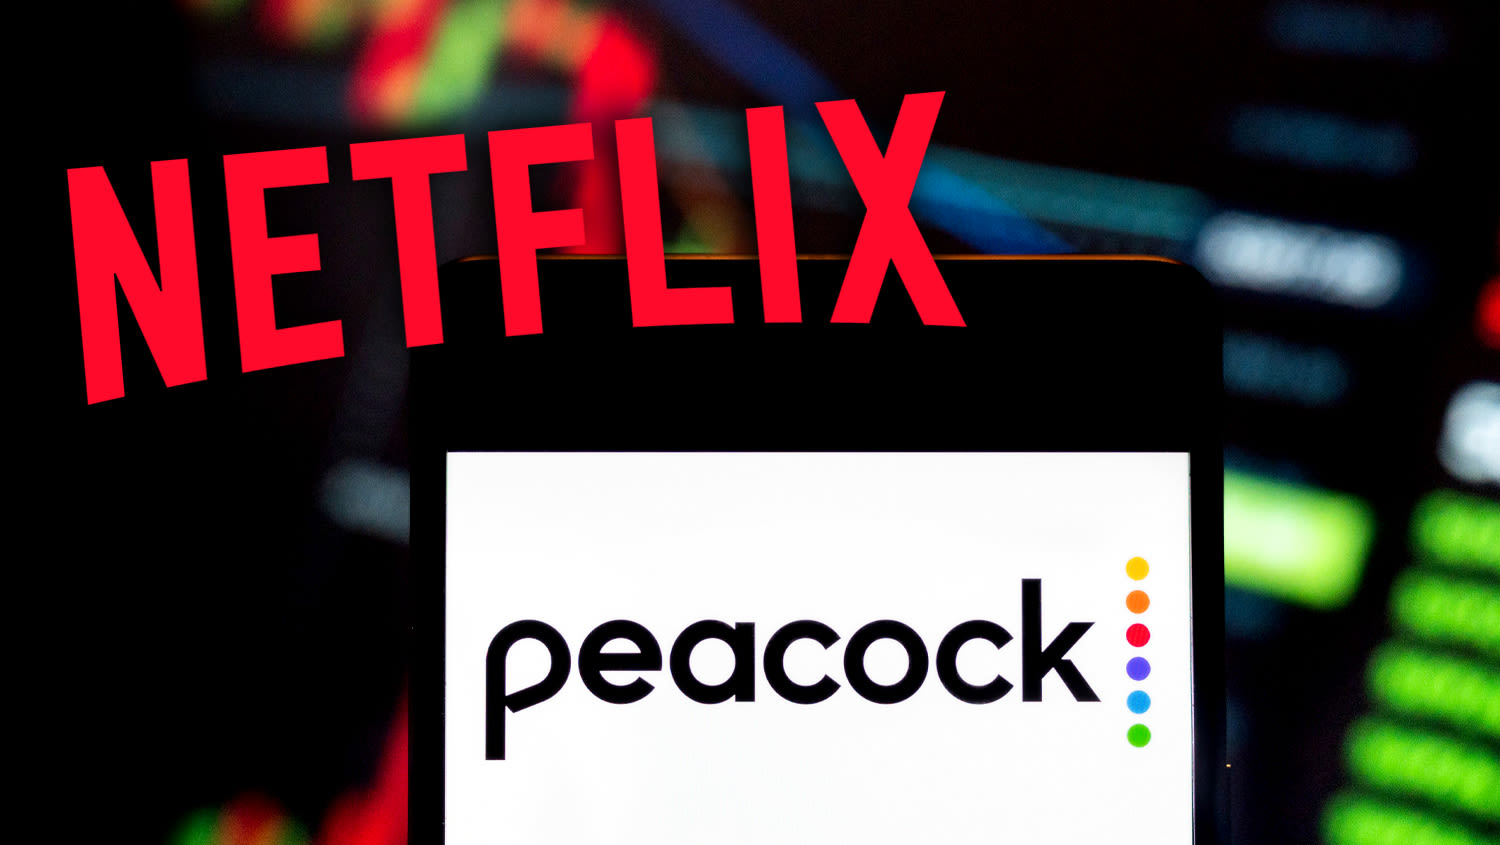 Verizon Offers Netflix Premium Subscription To Customers Who Sign Up For Peacock